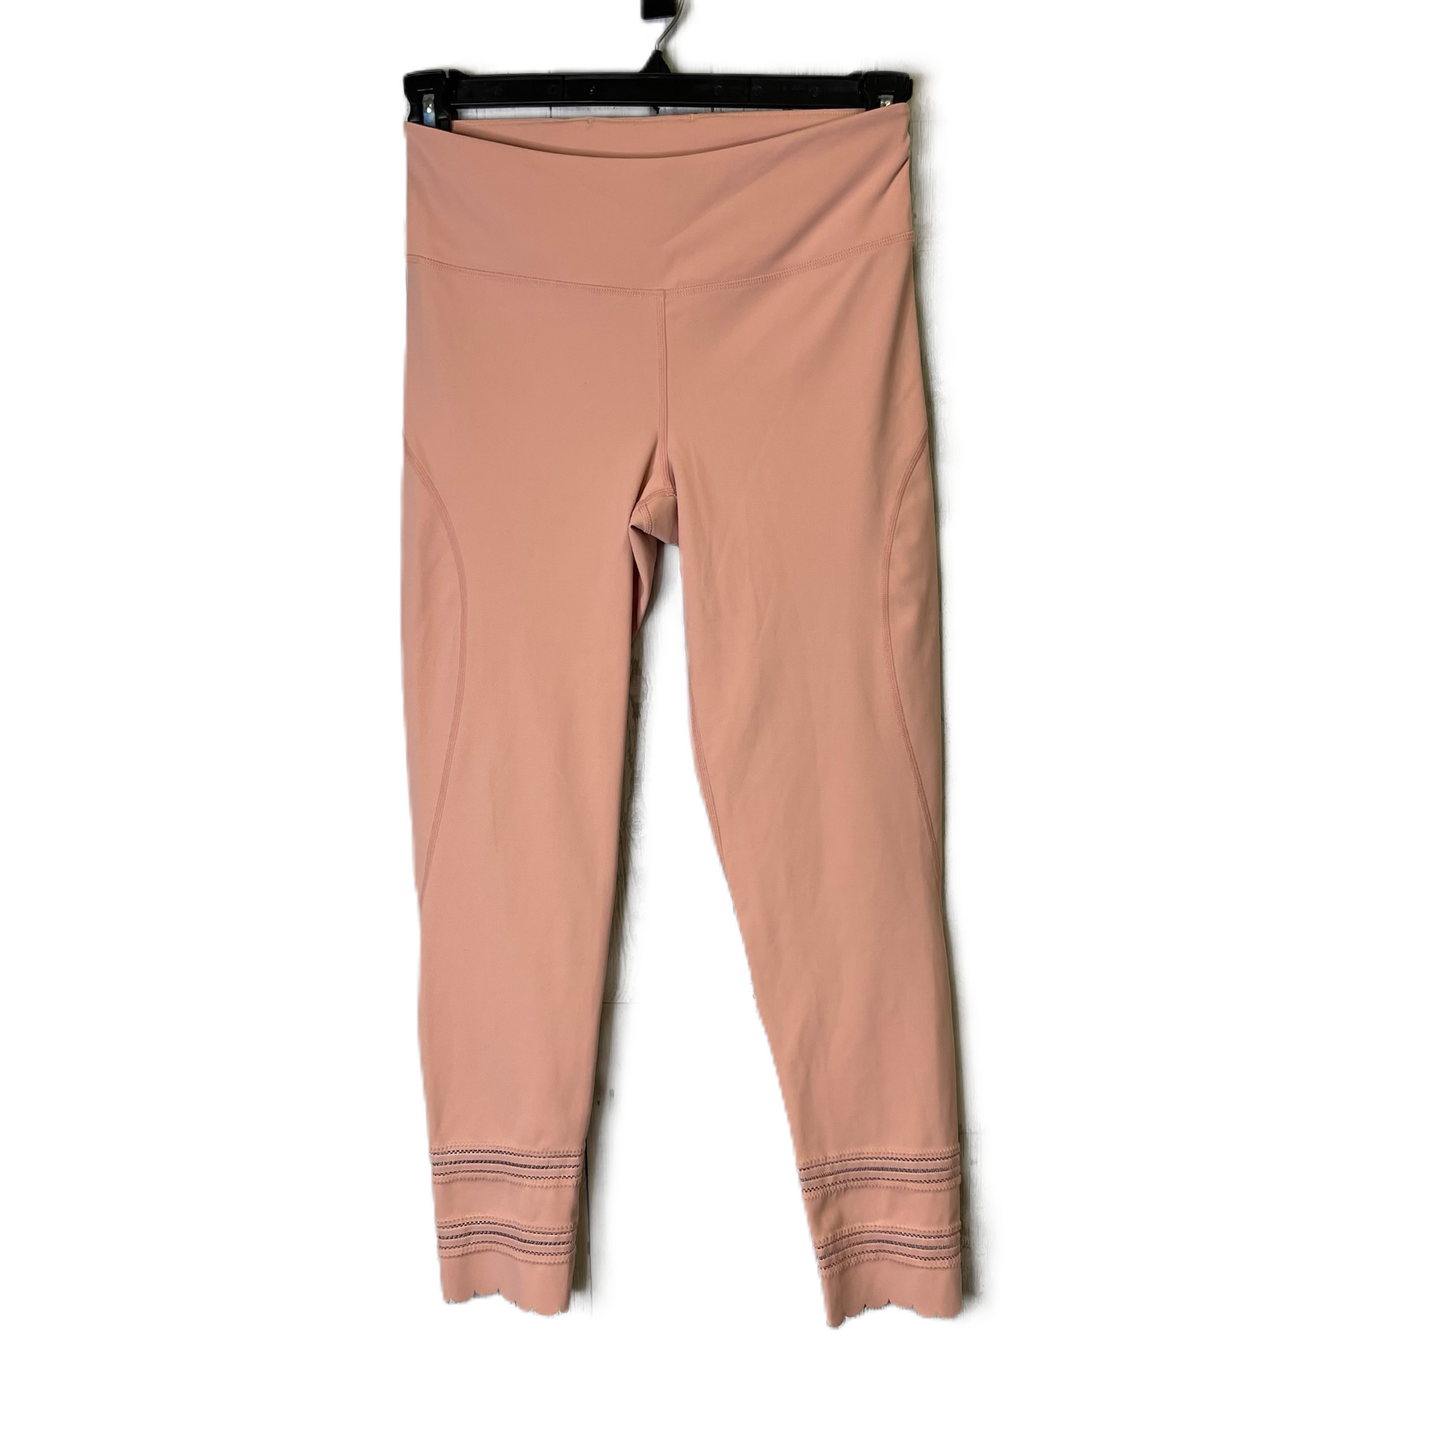 Peach Athletic Leggings By Free People, Size: M